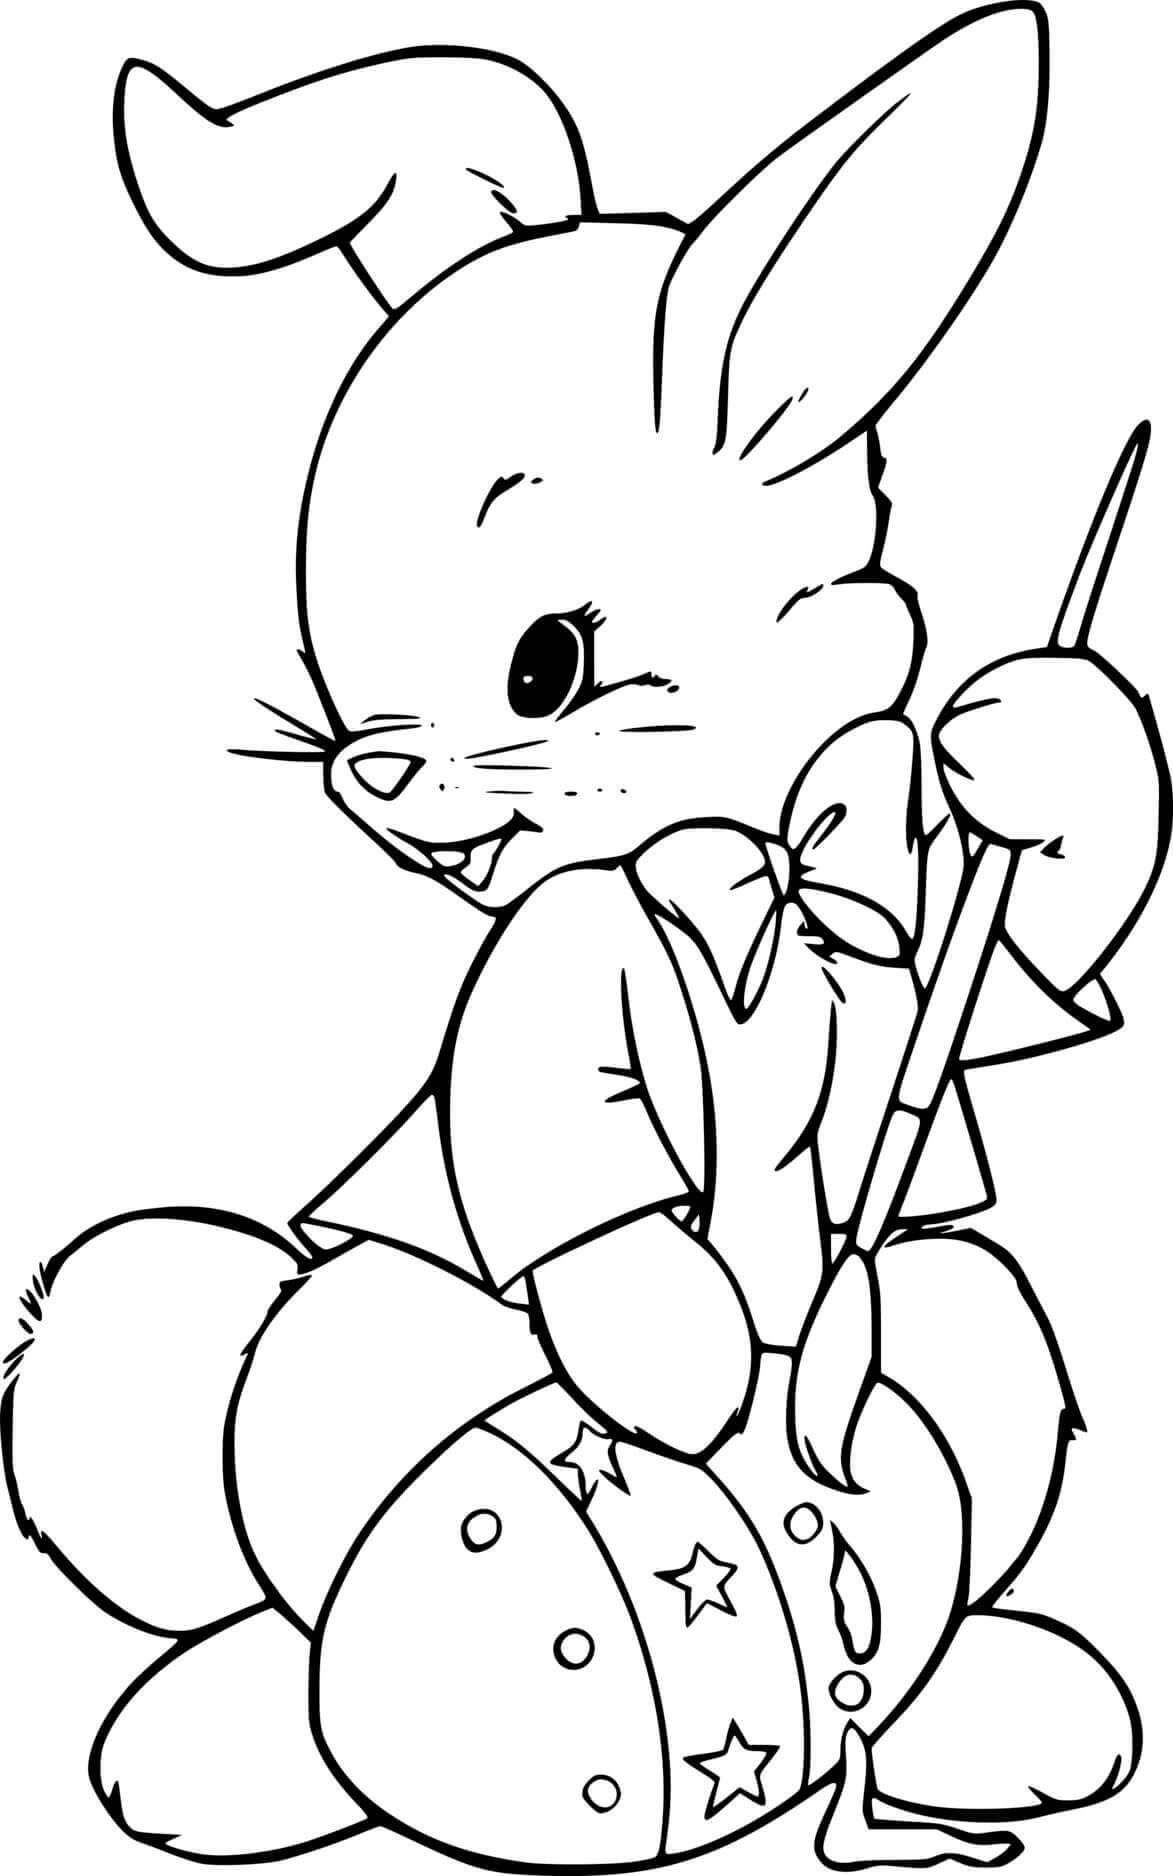 Easter Bunny Painting A Big Egg Coloring Page